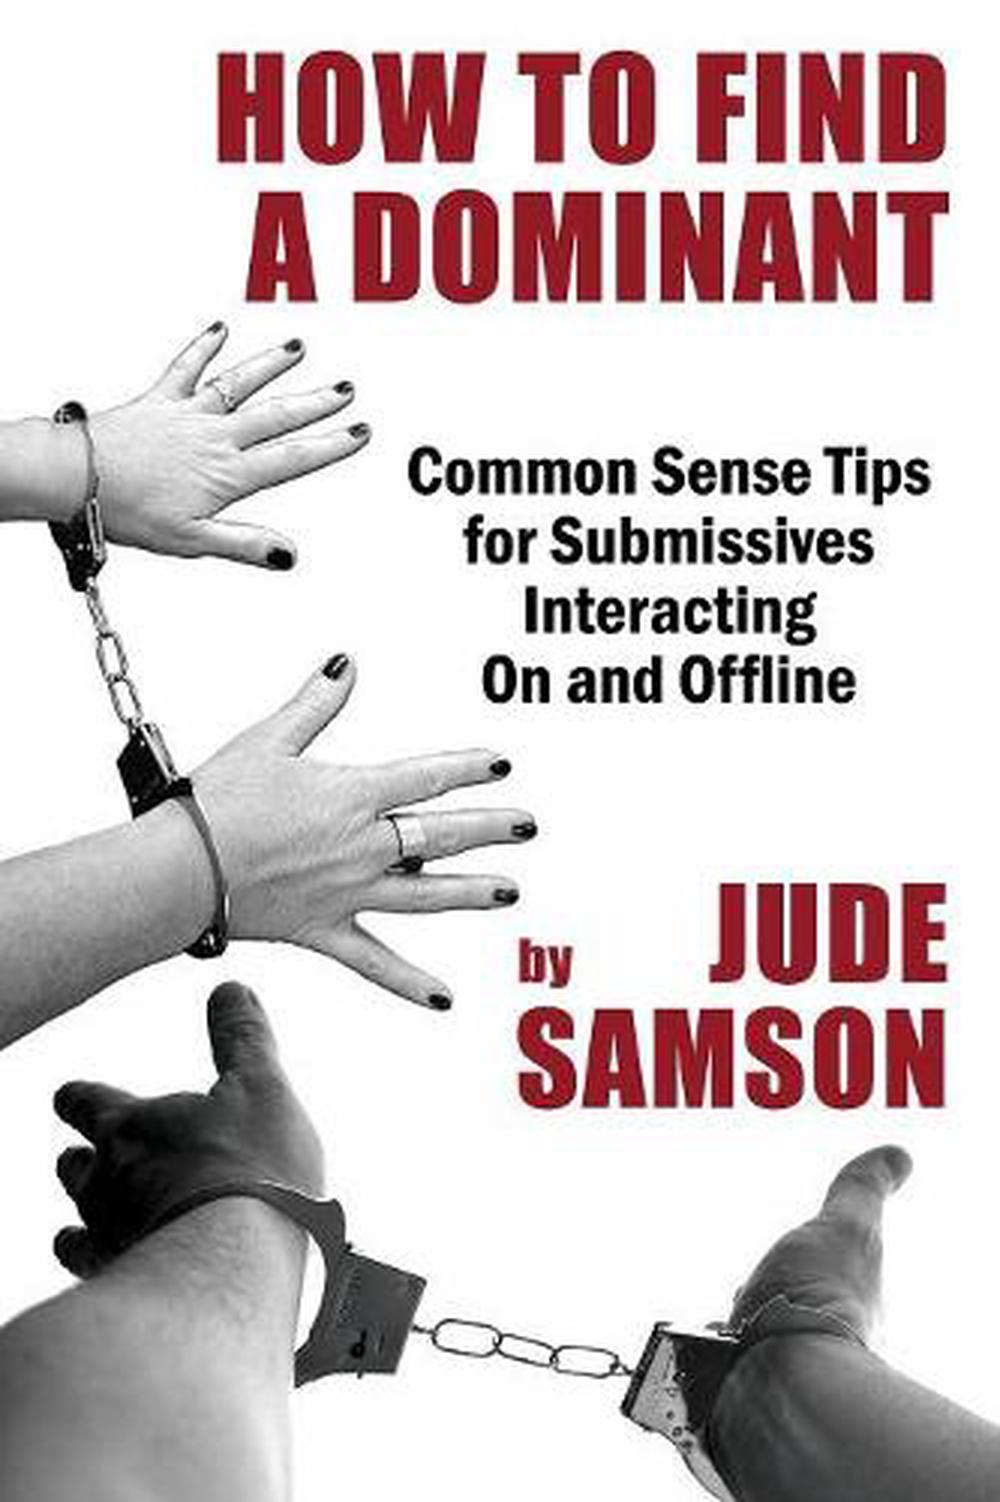 How To Find A Dominant Common Sense Tips For Submissives Interacting